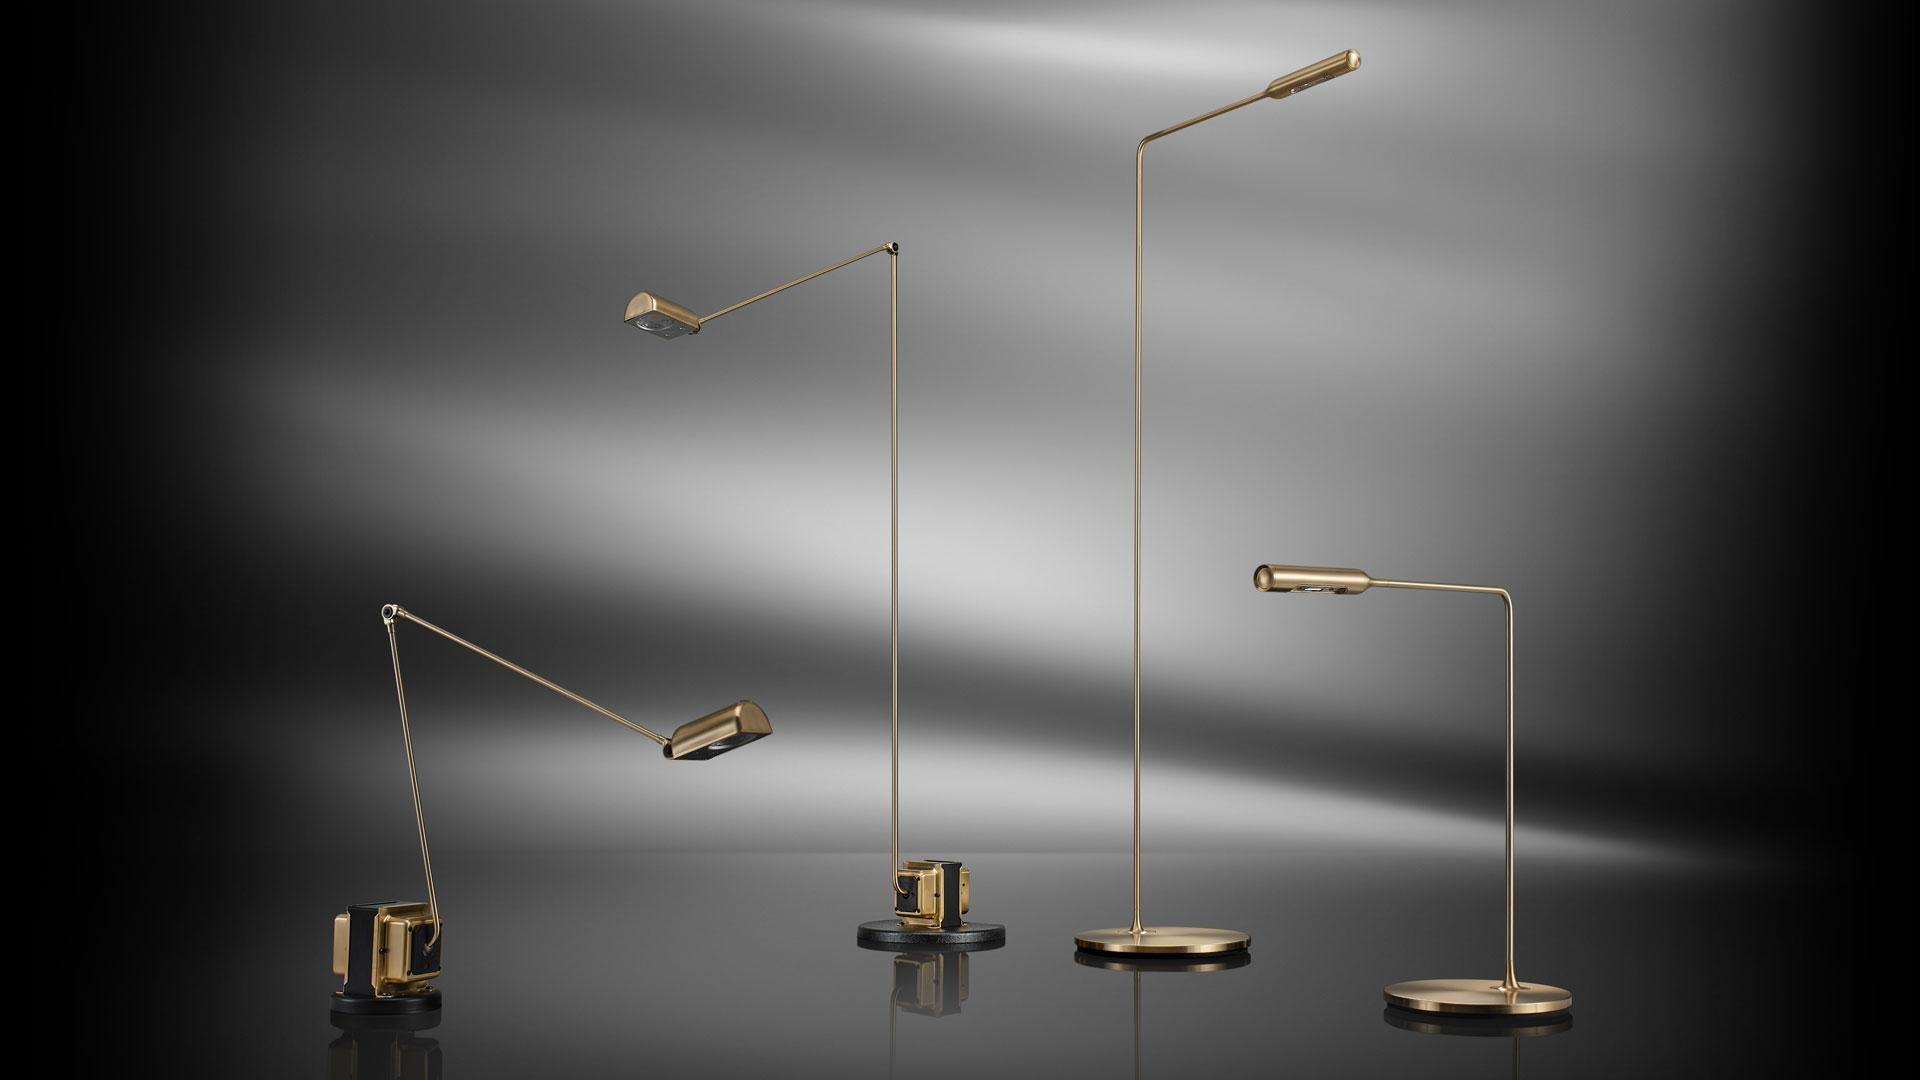 Daphine Terra Gold
Daphine and Flo, two of our most important icons, are now enriched with a new special semi-gloss brushed “yellow Gold” finish, which lends them uniqueness and prestige.
The special gilding treatment, which accentuates the